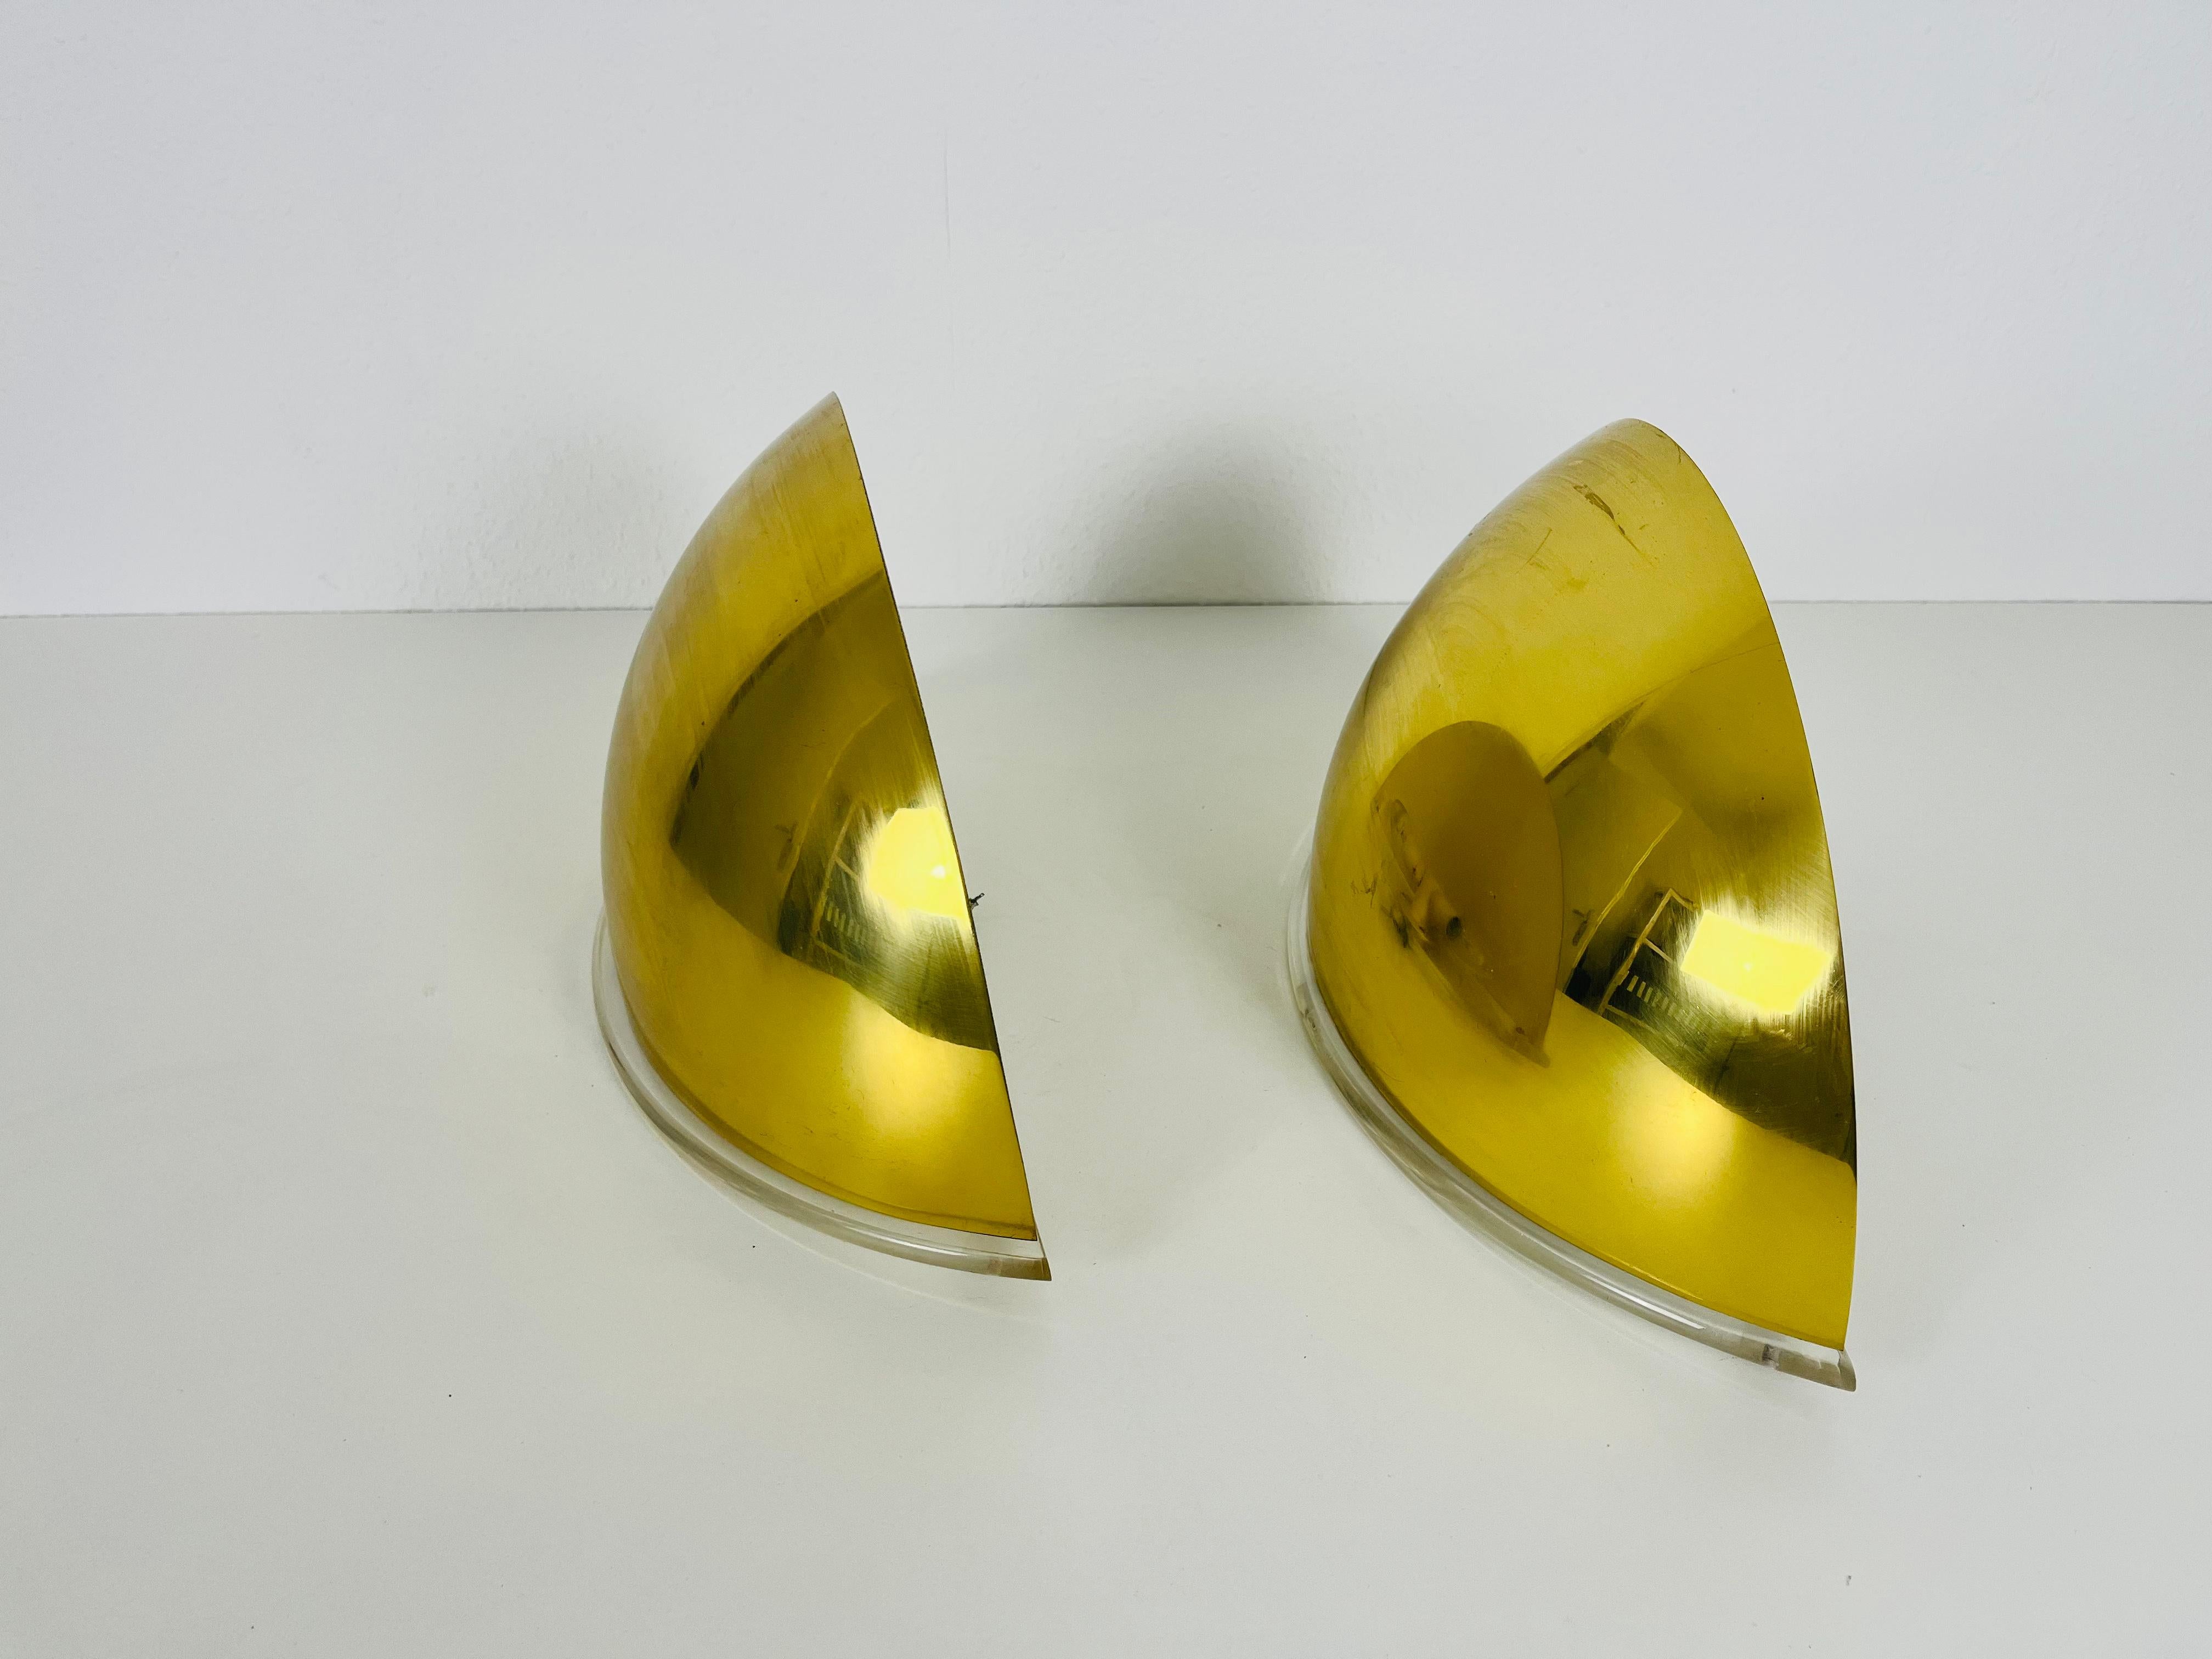 A pair of wall lampst by Florian Schulz made in Germany in the 1970s. It is fascinating with its gilt brass shade and plexi glass base.

The light requires E14 light bulbs. Works with both 110/220 V. Good vintage condition.

Free worldwide express